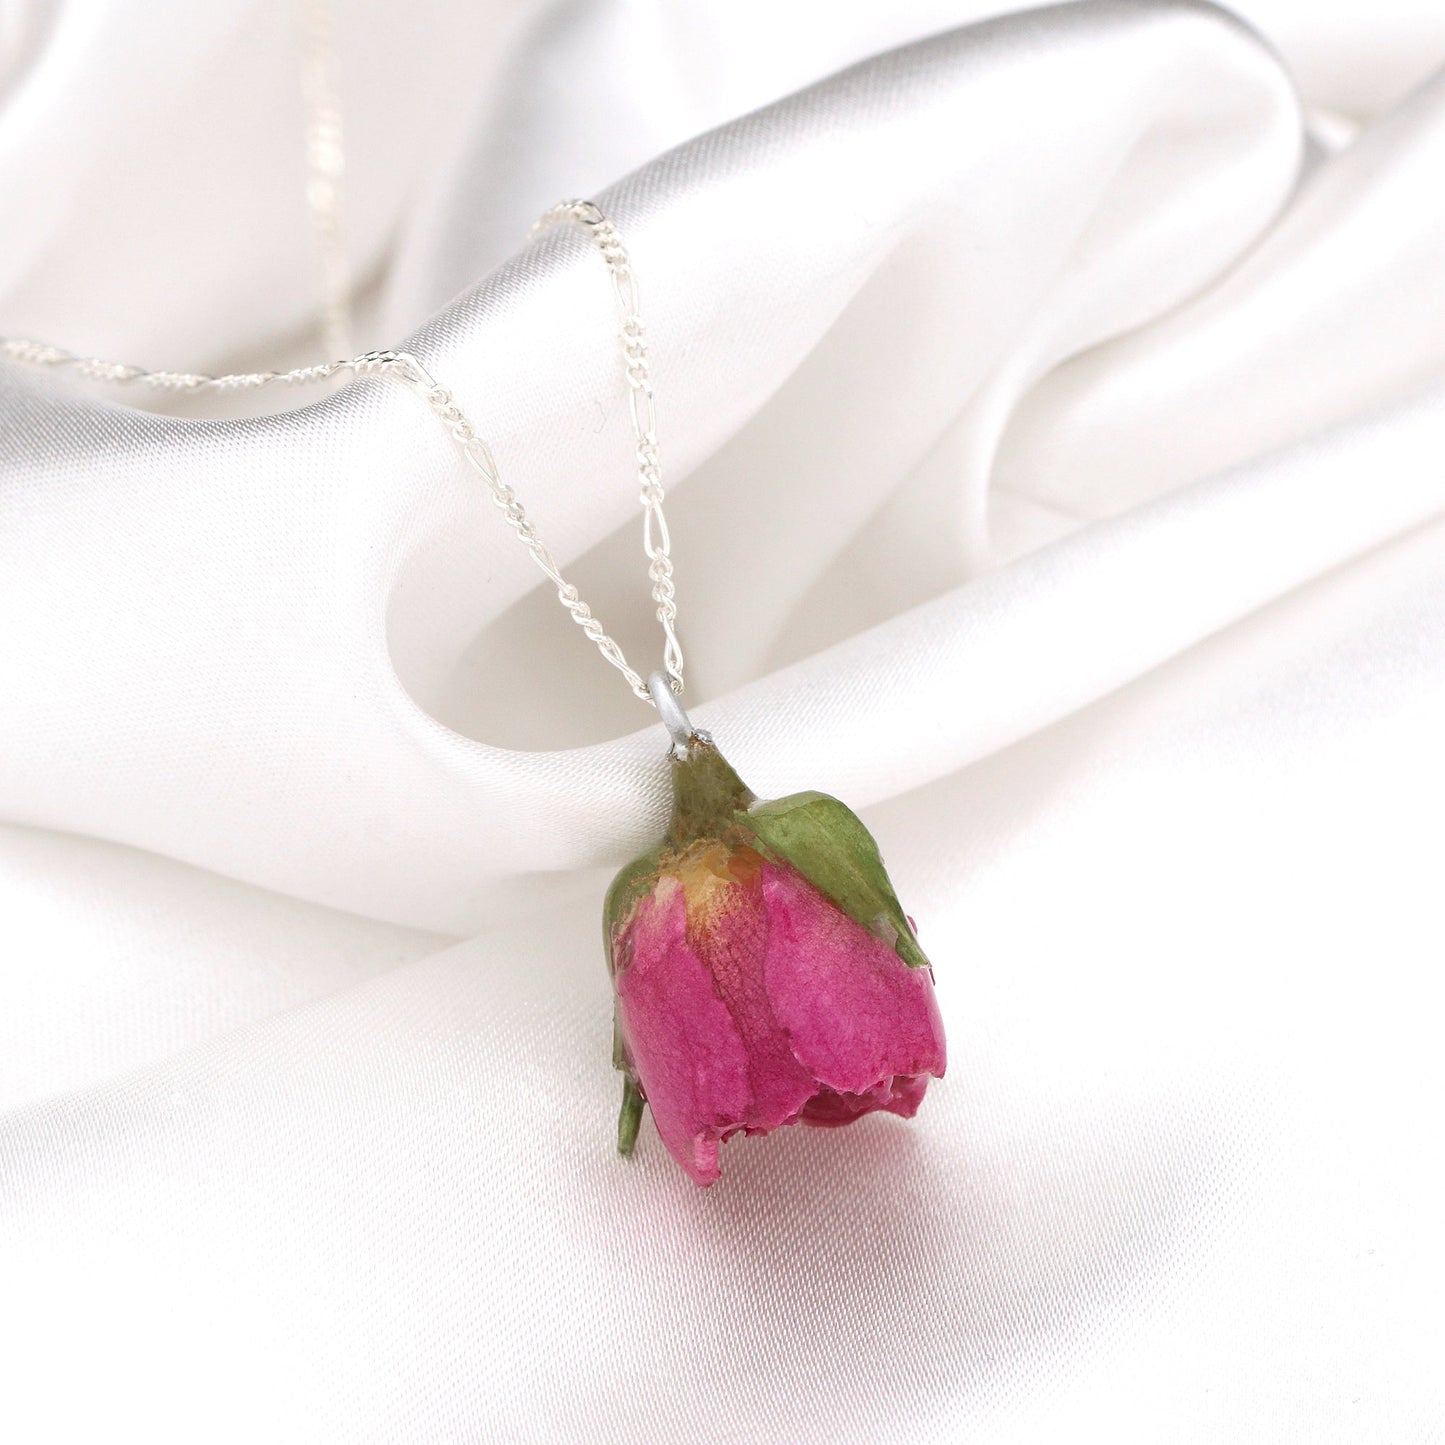 Real Rose Pendant with 925 Sterling Silver Chain - Botanical Necklace - K925-117